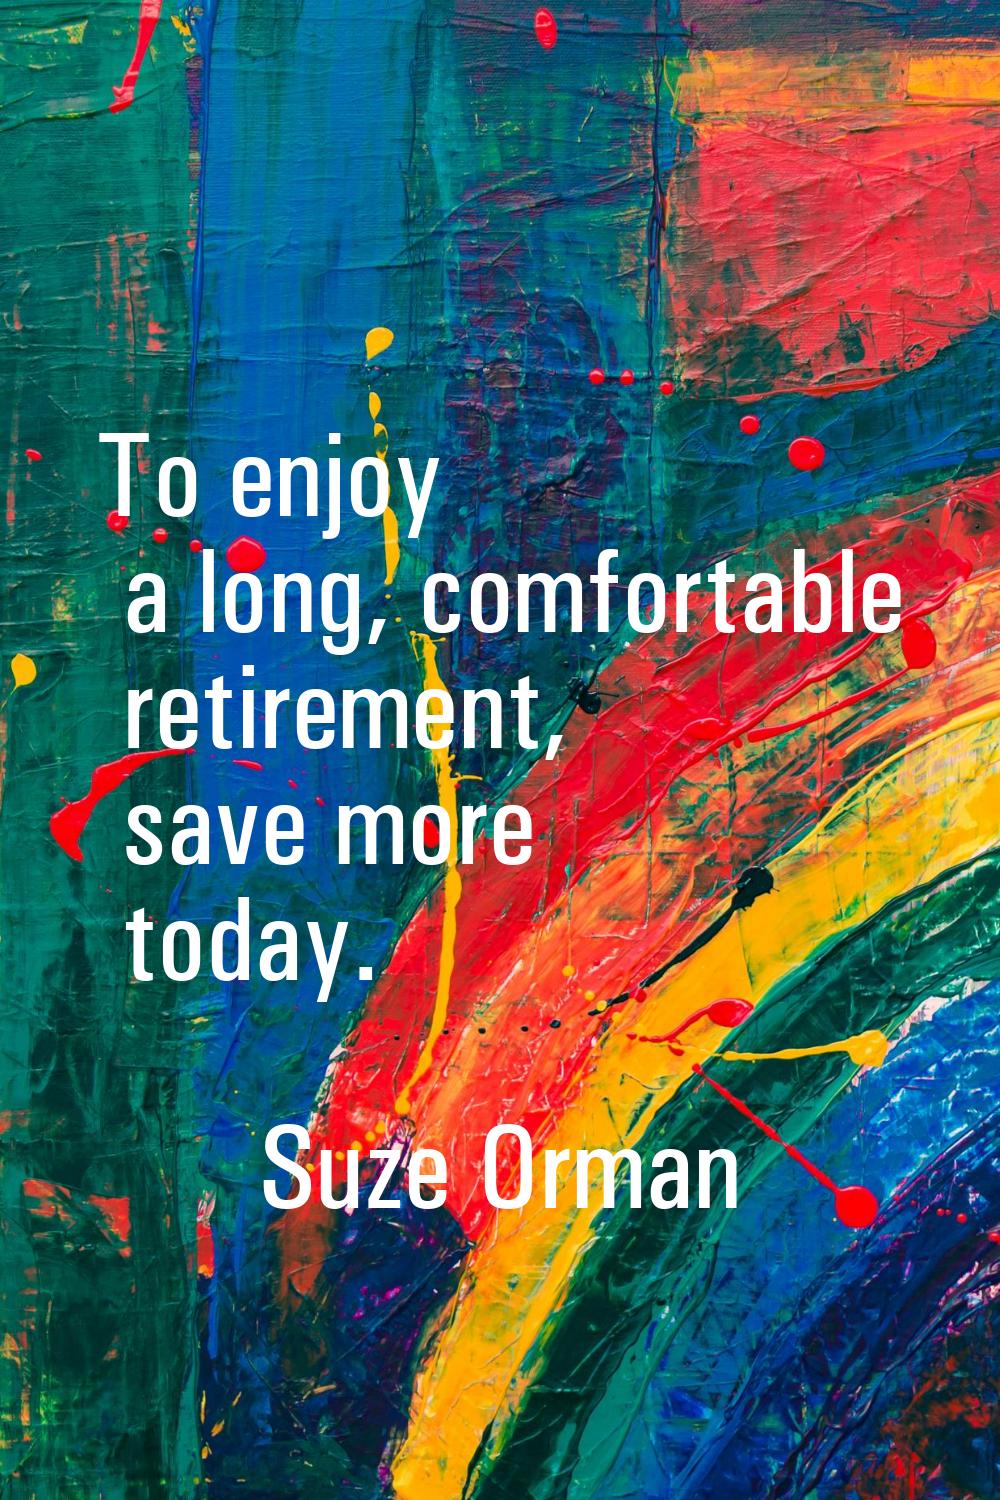 To enjoy a long, comfortable retirement, save more today.